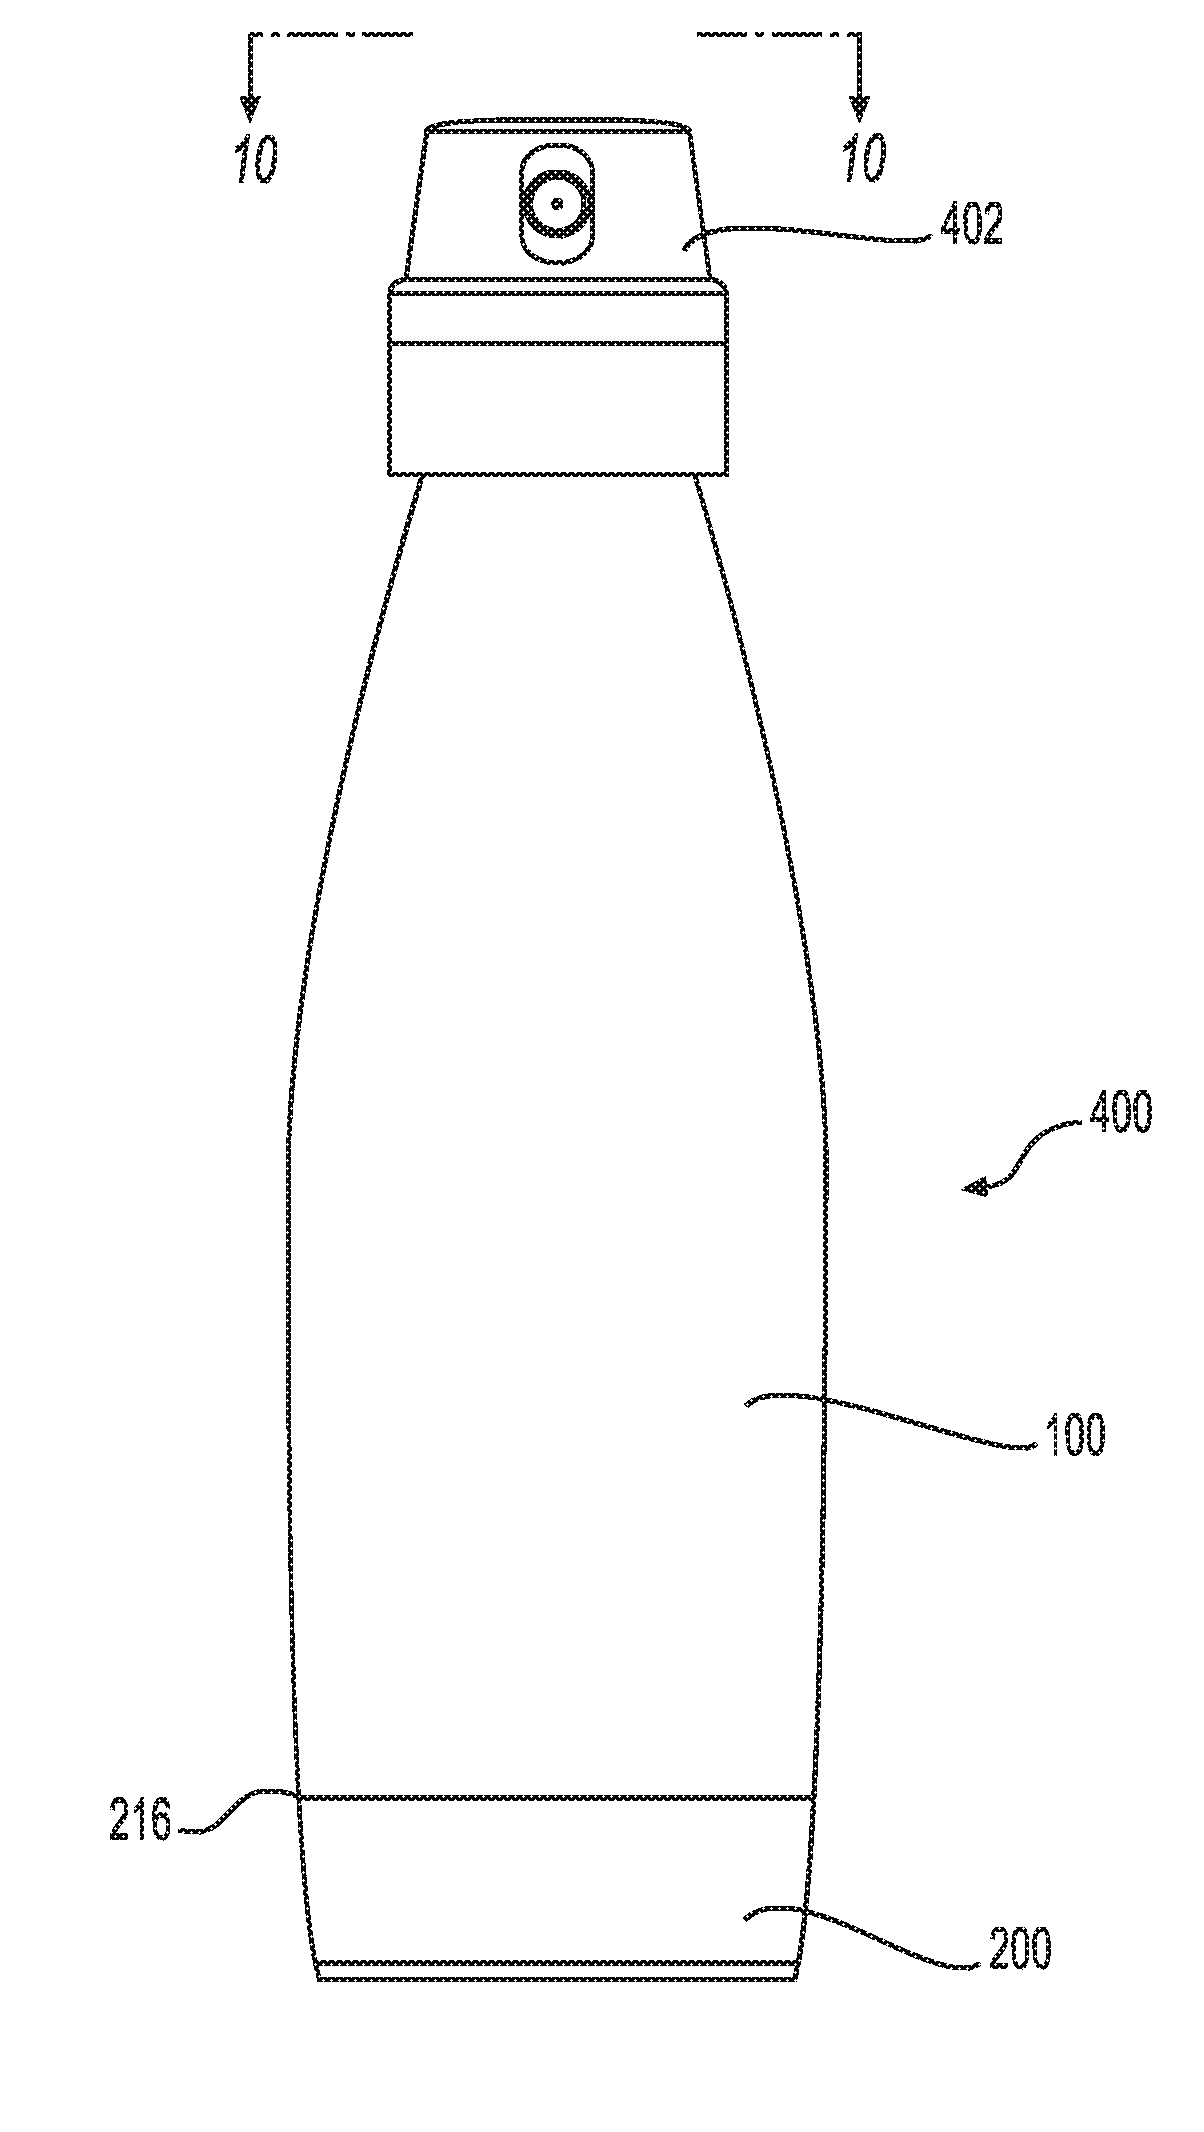 Plastic bottle and base cup for a pressurized dispensing system